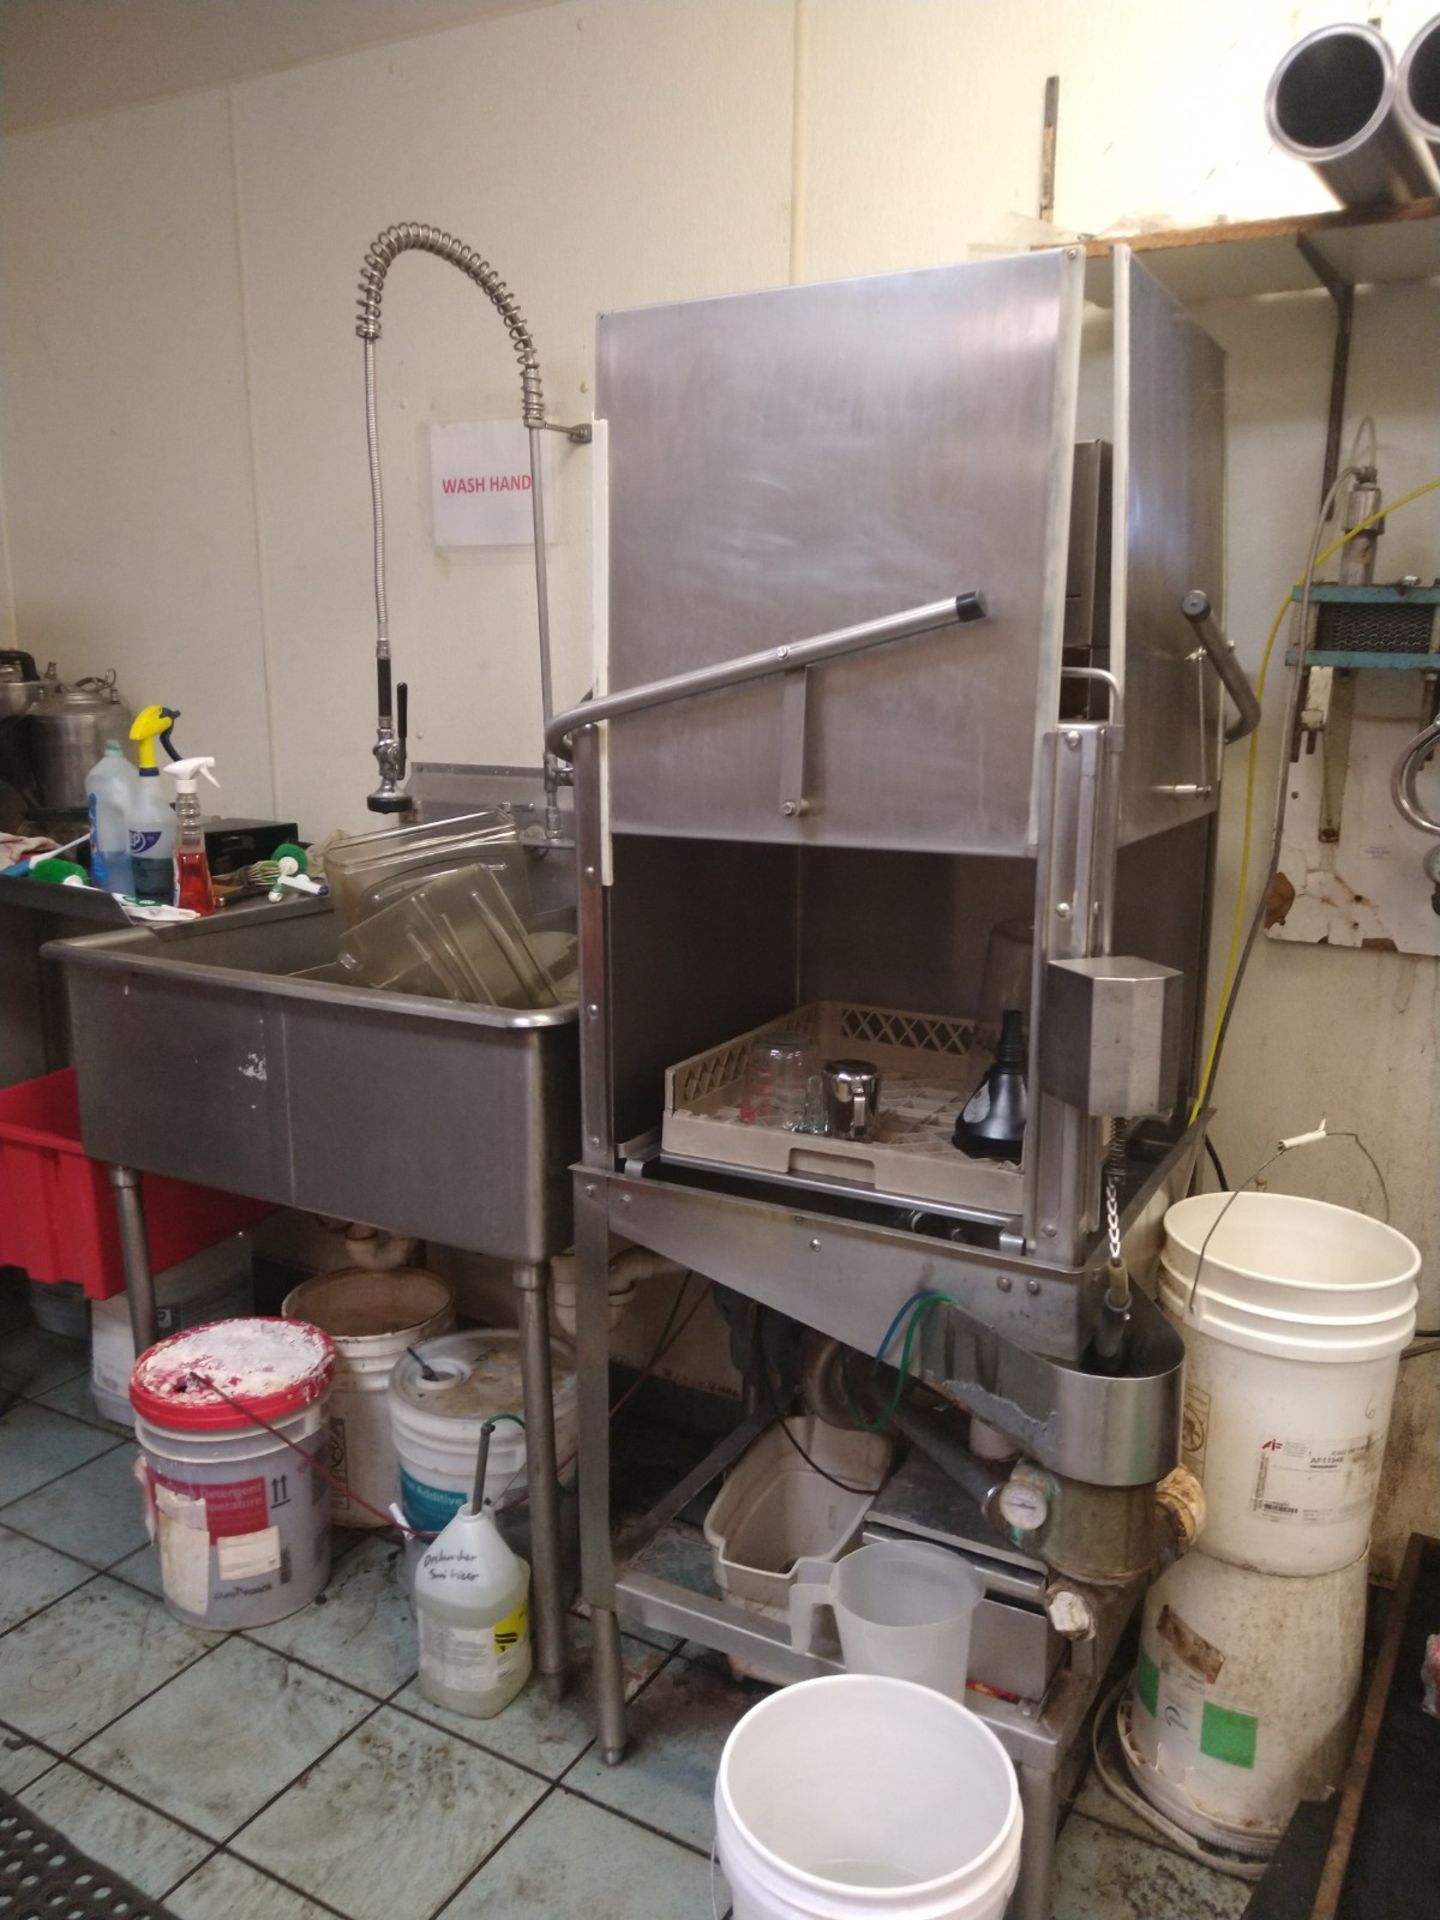 BUSSEY S/S DISHWASHER, MODEL 0-2, S/N 111, 120 V (LOCATED IN MADISON, WI)(RIG FEE: $150)